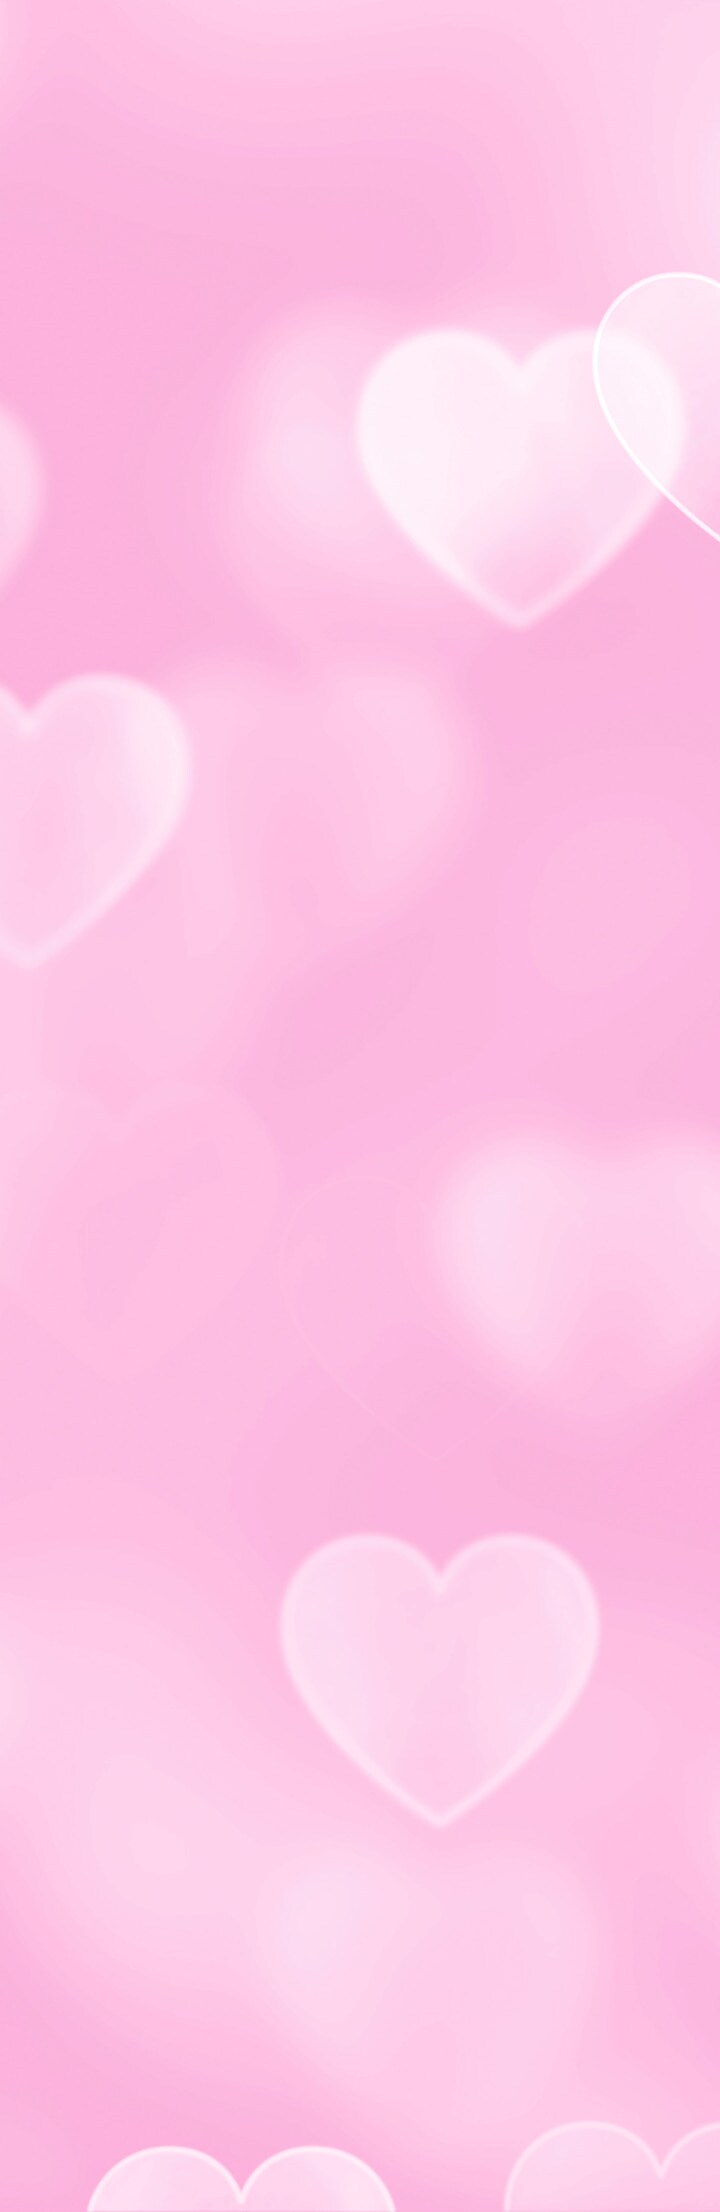 Background image containing bubbles over a soft pink background